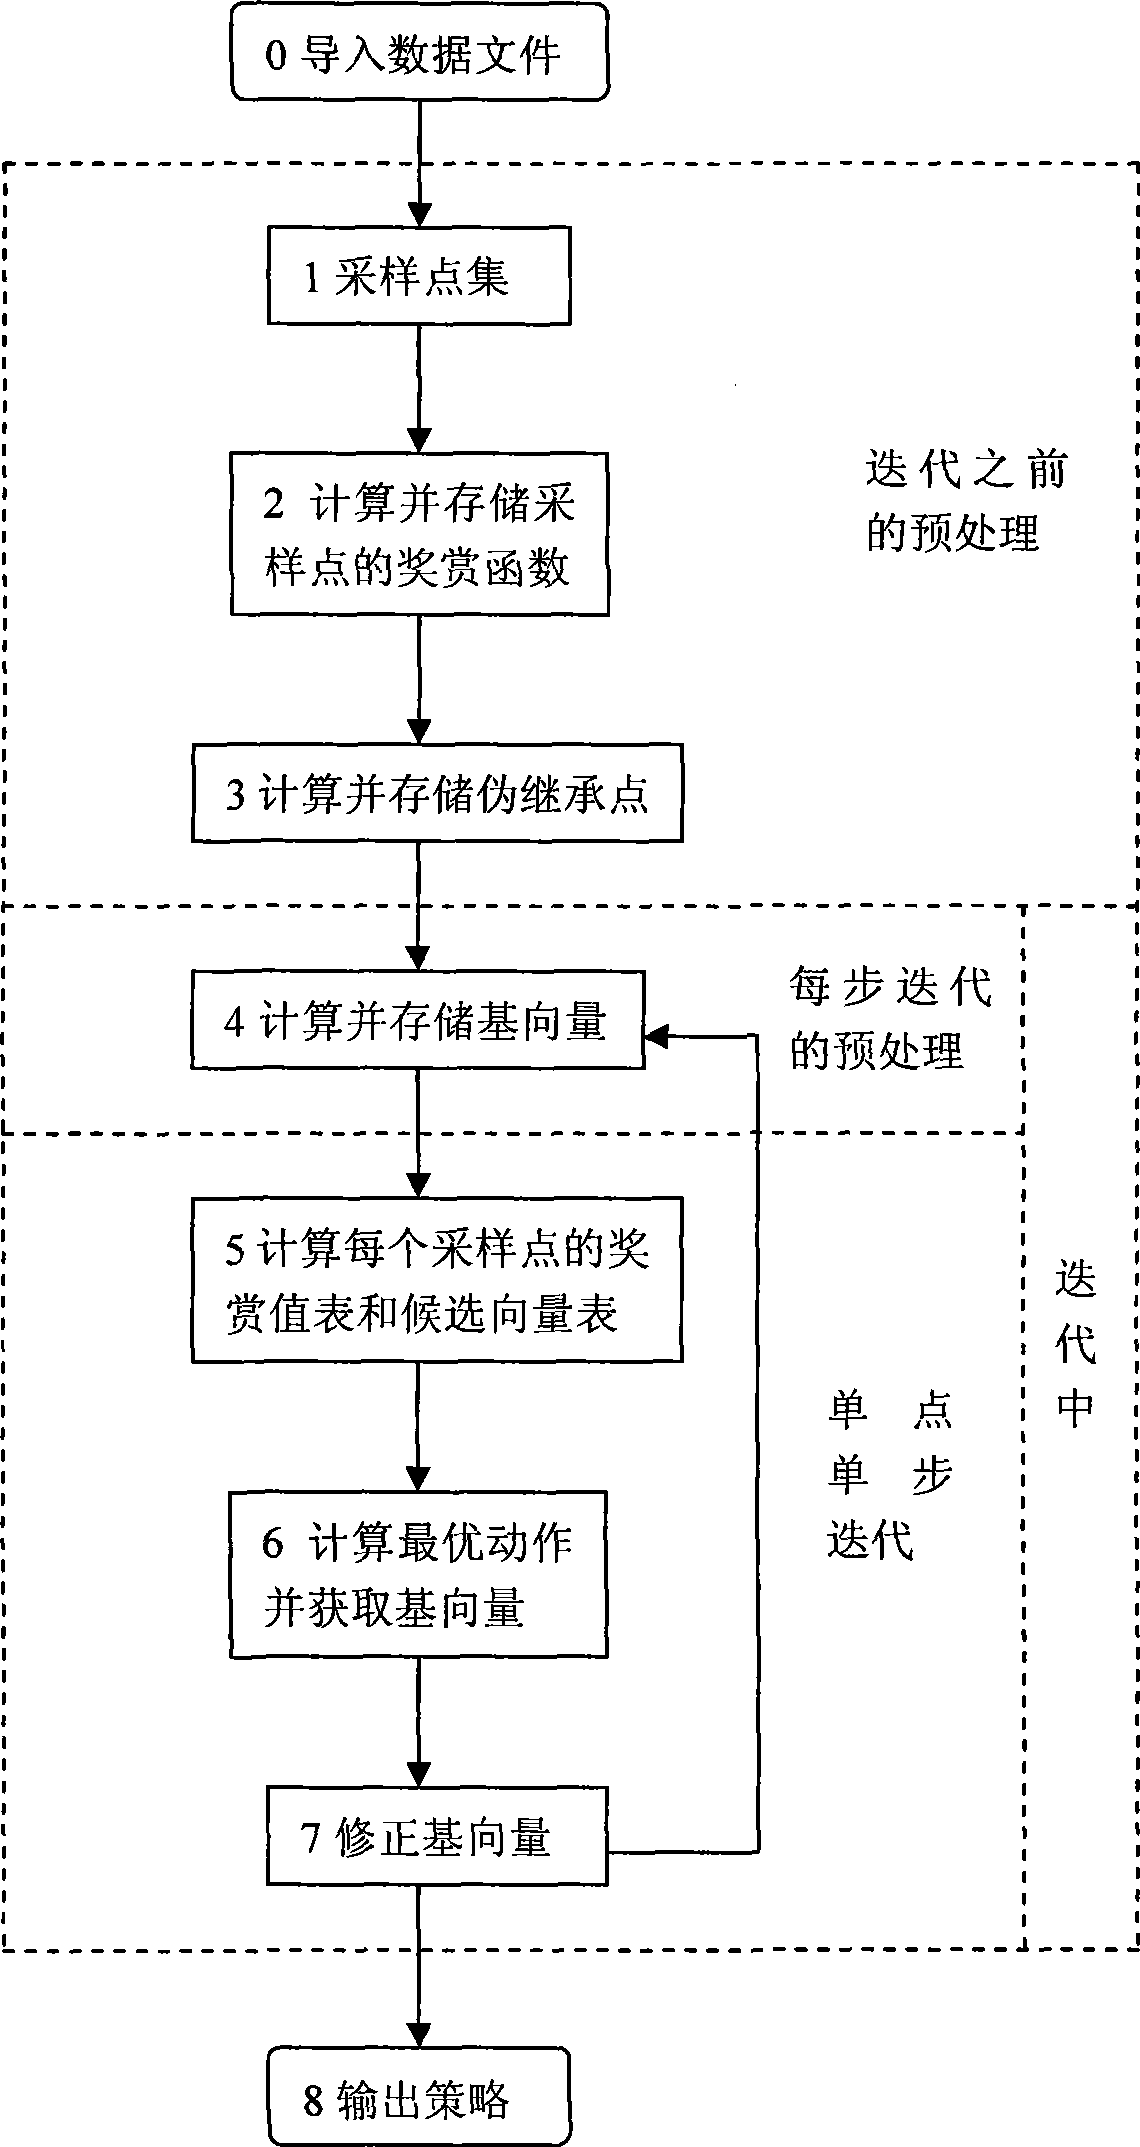 Preprocess method of partially observable Markov decision process based on points